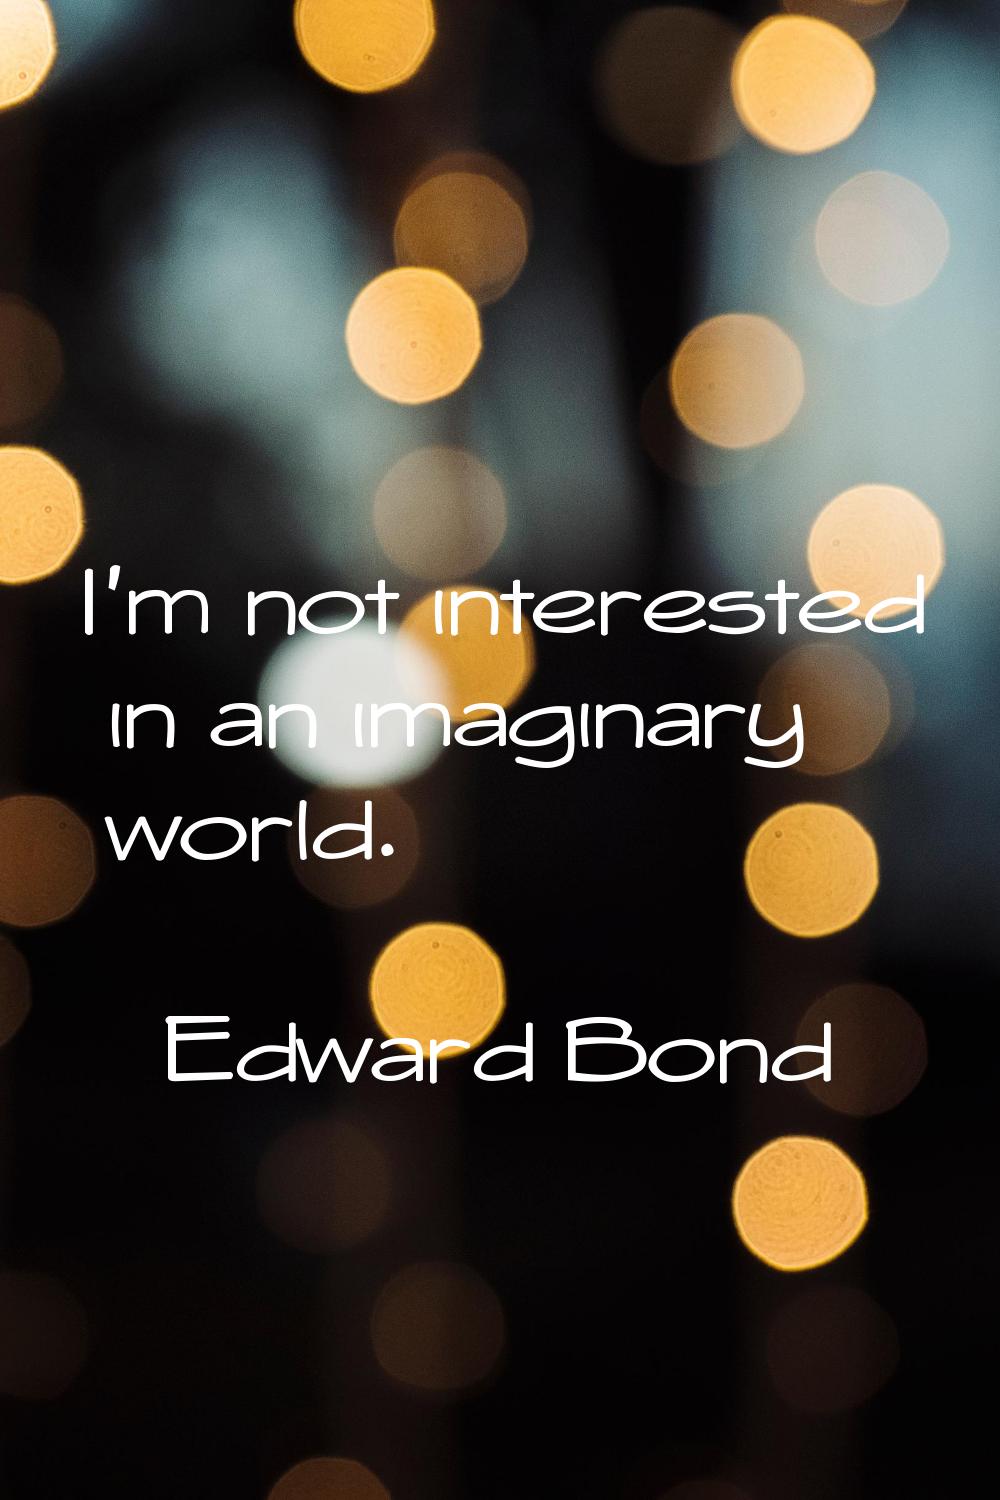 I'm not interested in an imaginary world.